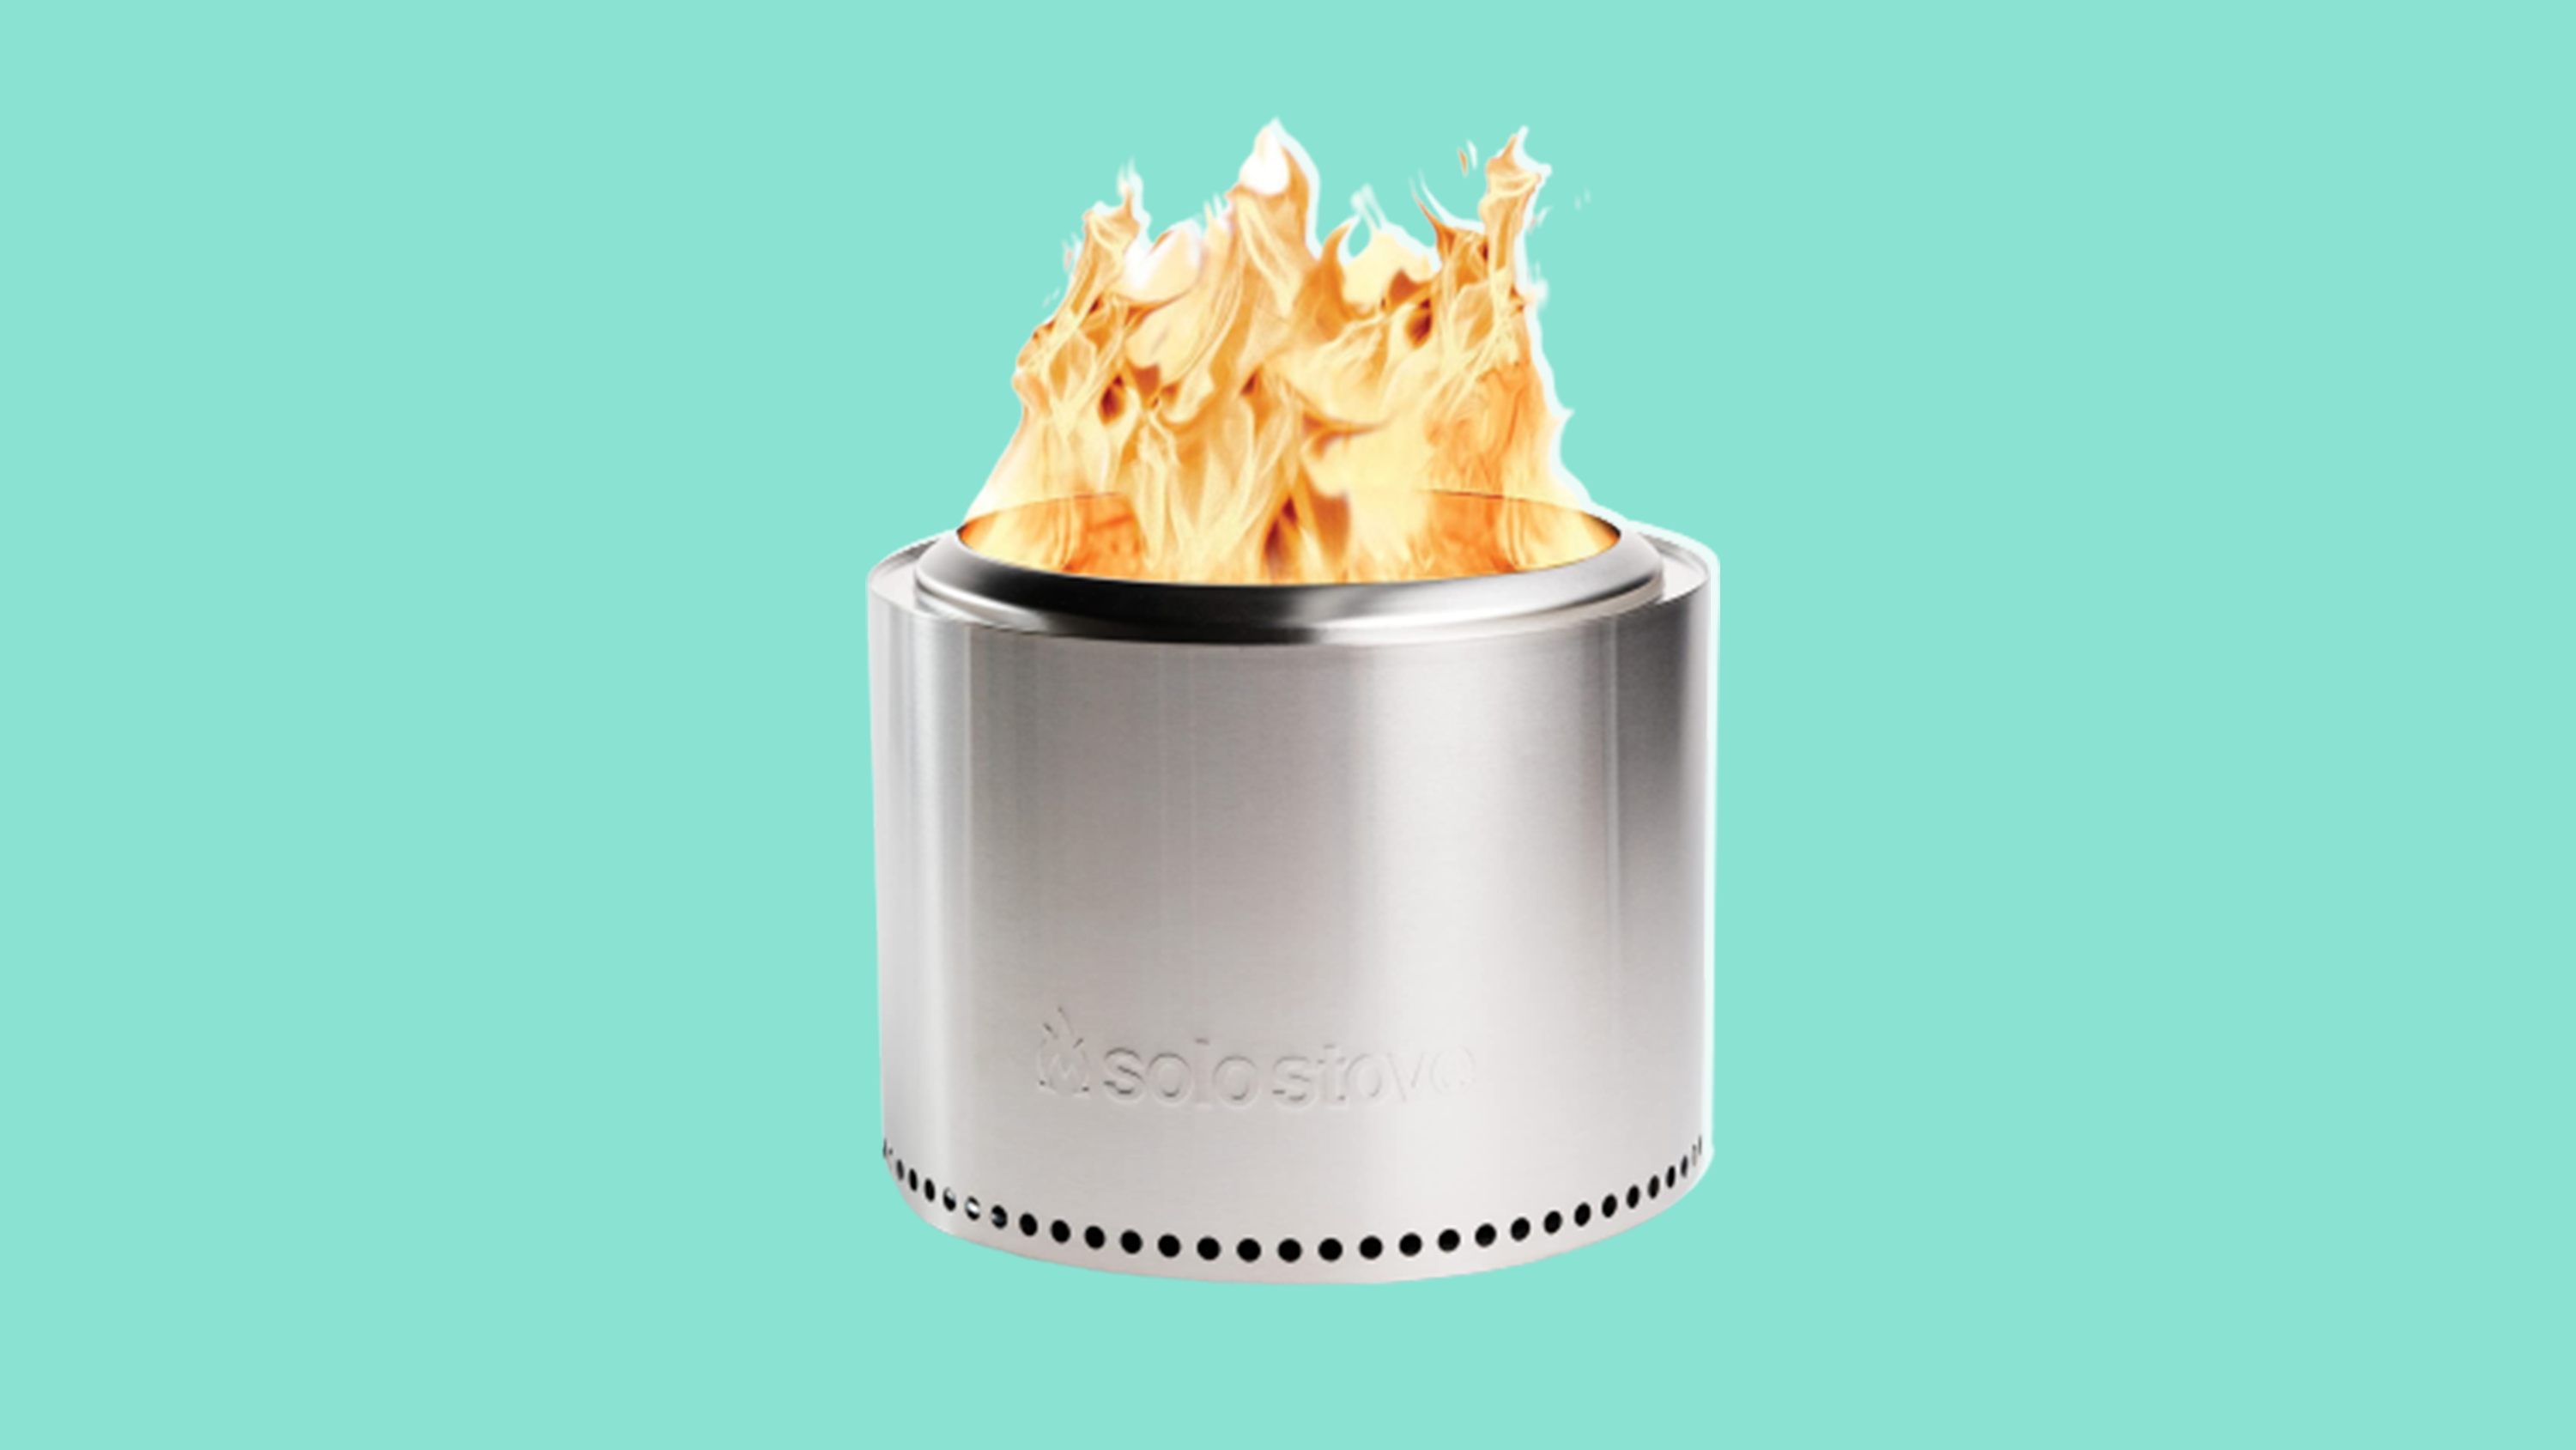 Best gifts for men: Solo Stove 2.0